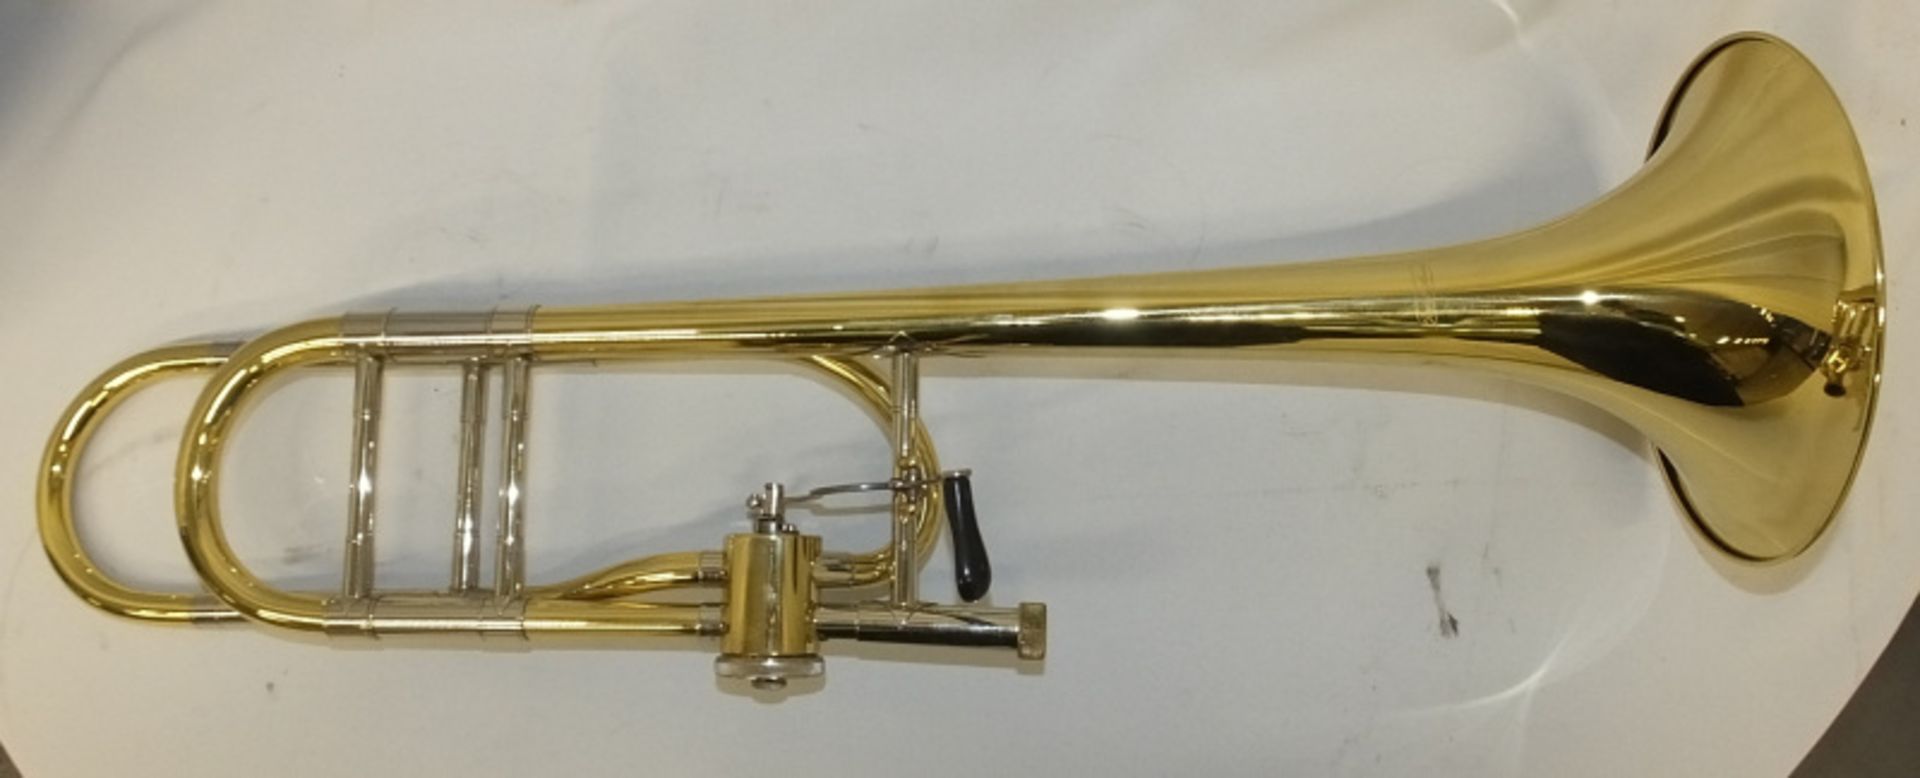 Gear 4 Music Trombone in case - Please check photos carefully - Image 4 of 11